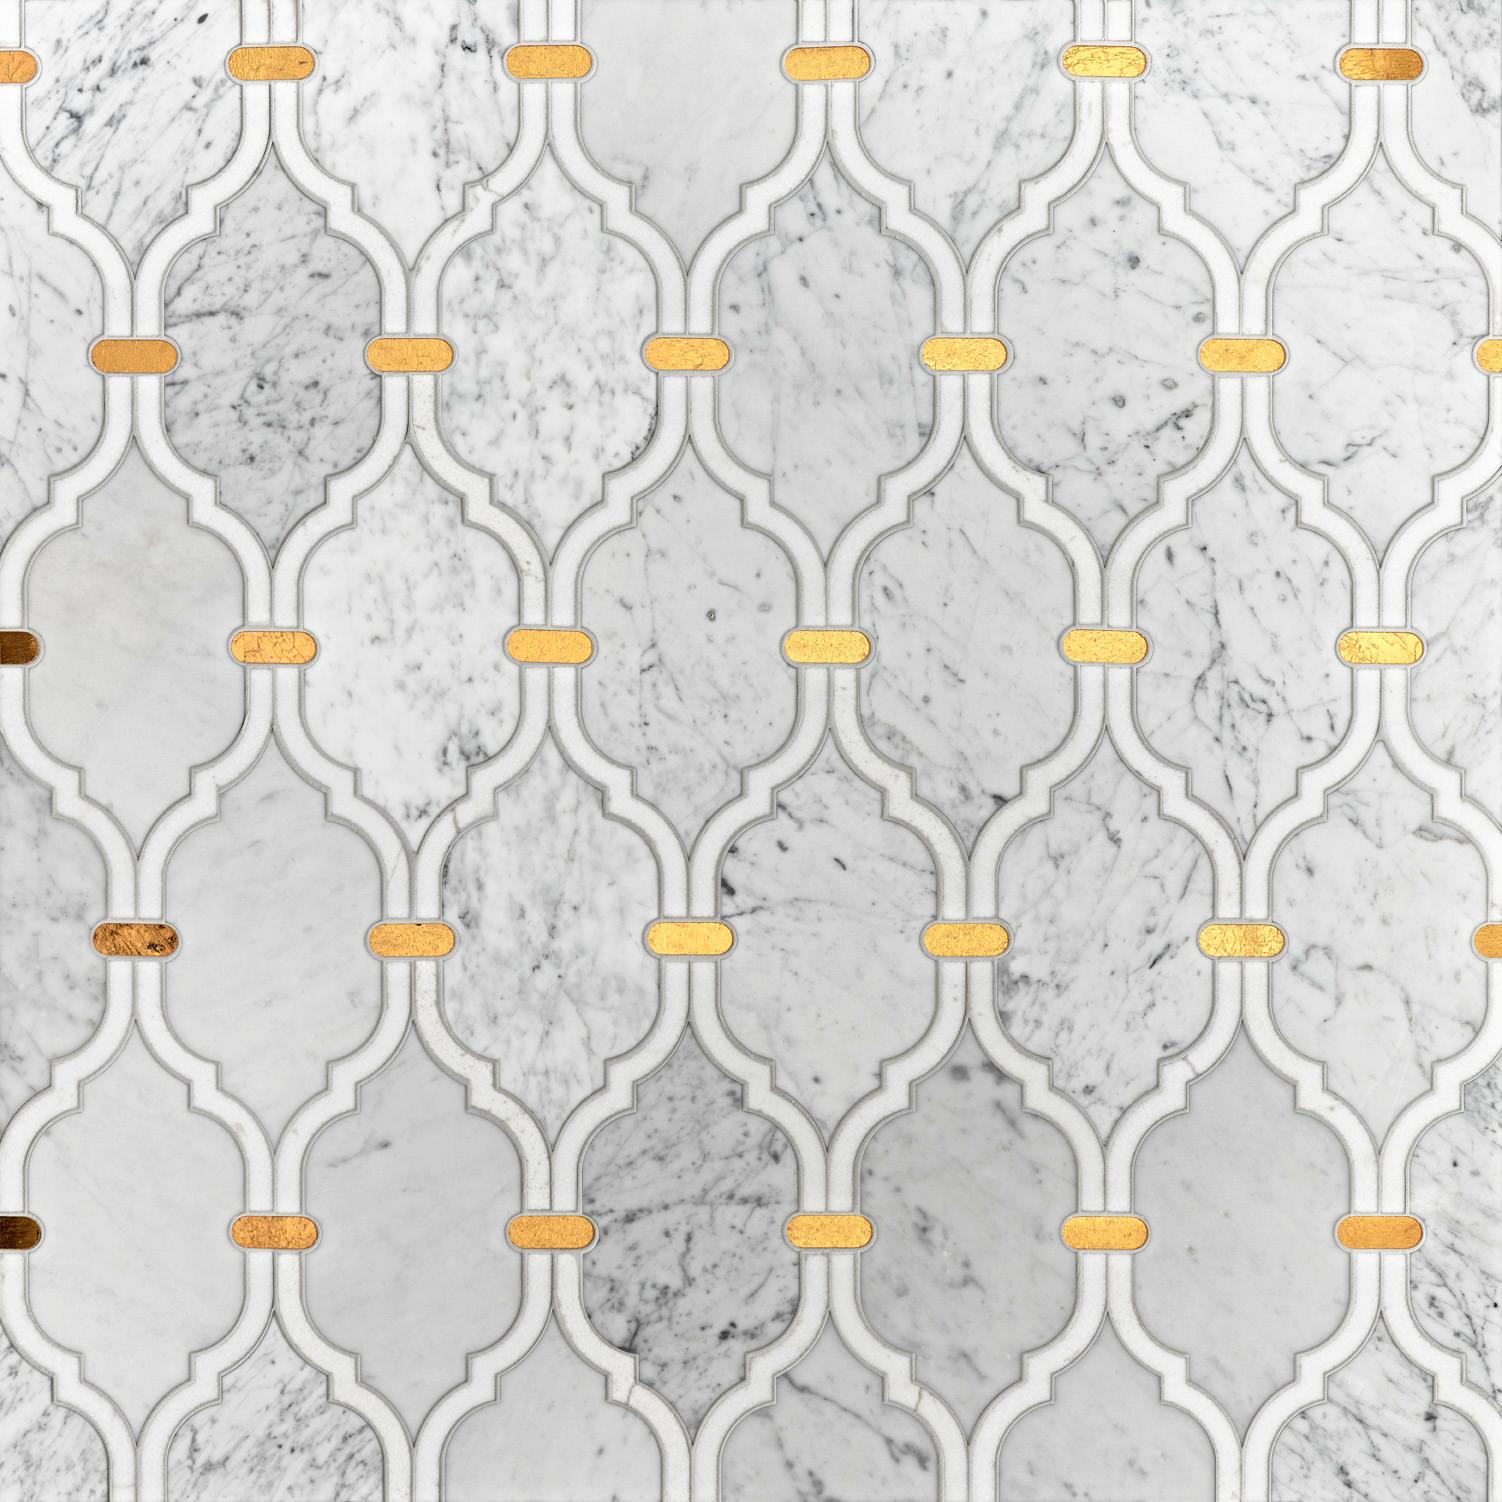 Waterjet marble patterns

Aloiina white
Bianco Americano , Thassos
glass: Insert of gold leaf glass mosaic
Price for square meter € 2.460

Aloina black
Black marble polished, black marble matt
Glass : Mosaic glass insert , Alma & Vis One
Price for